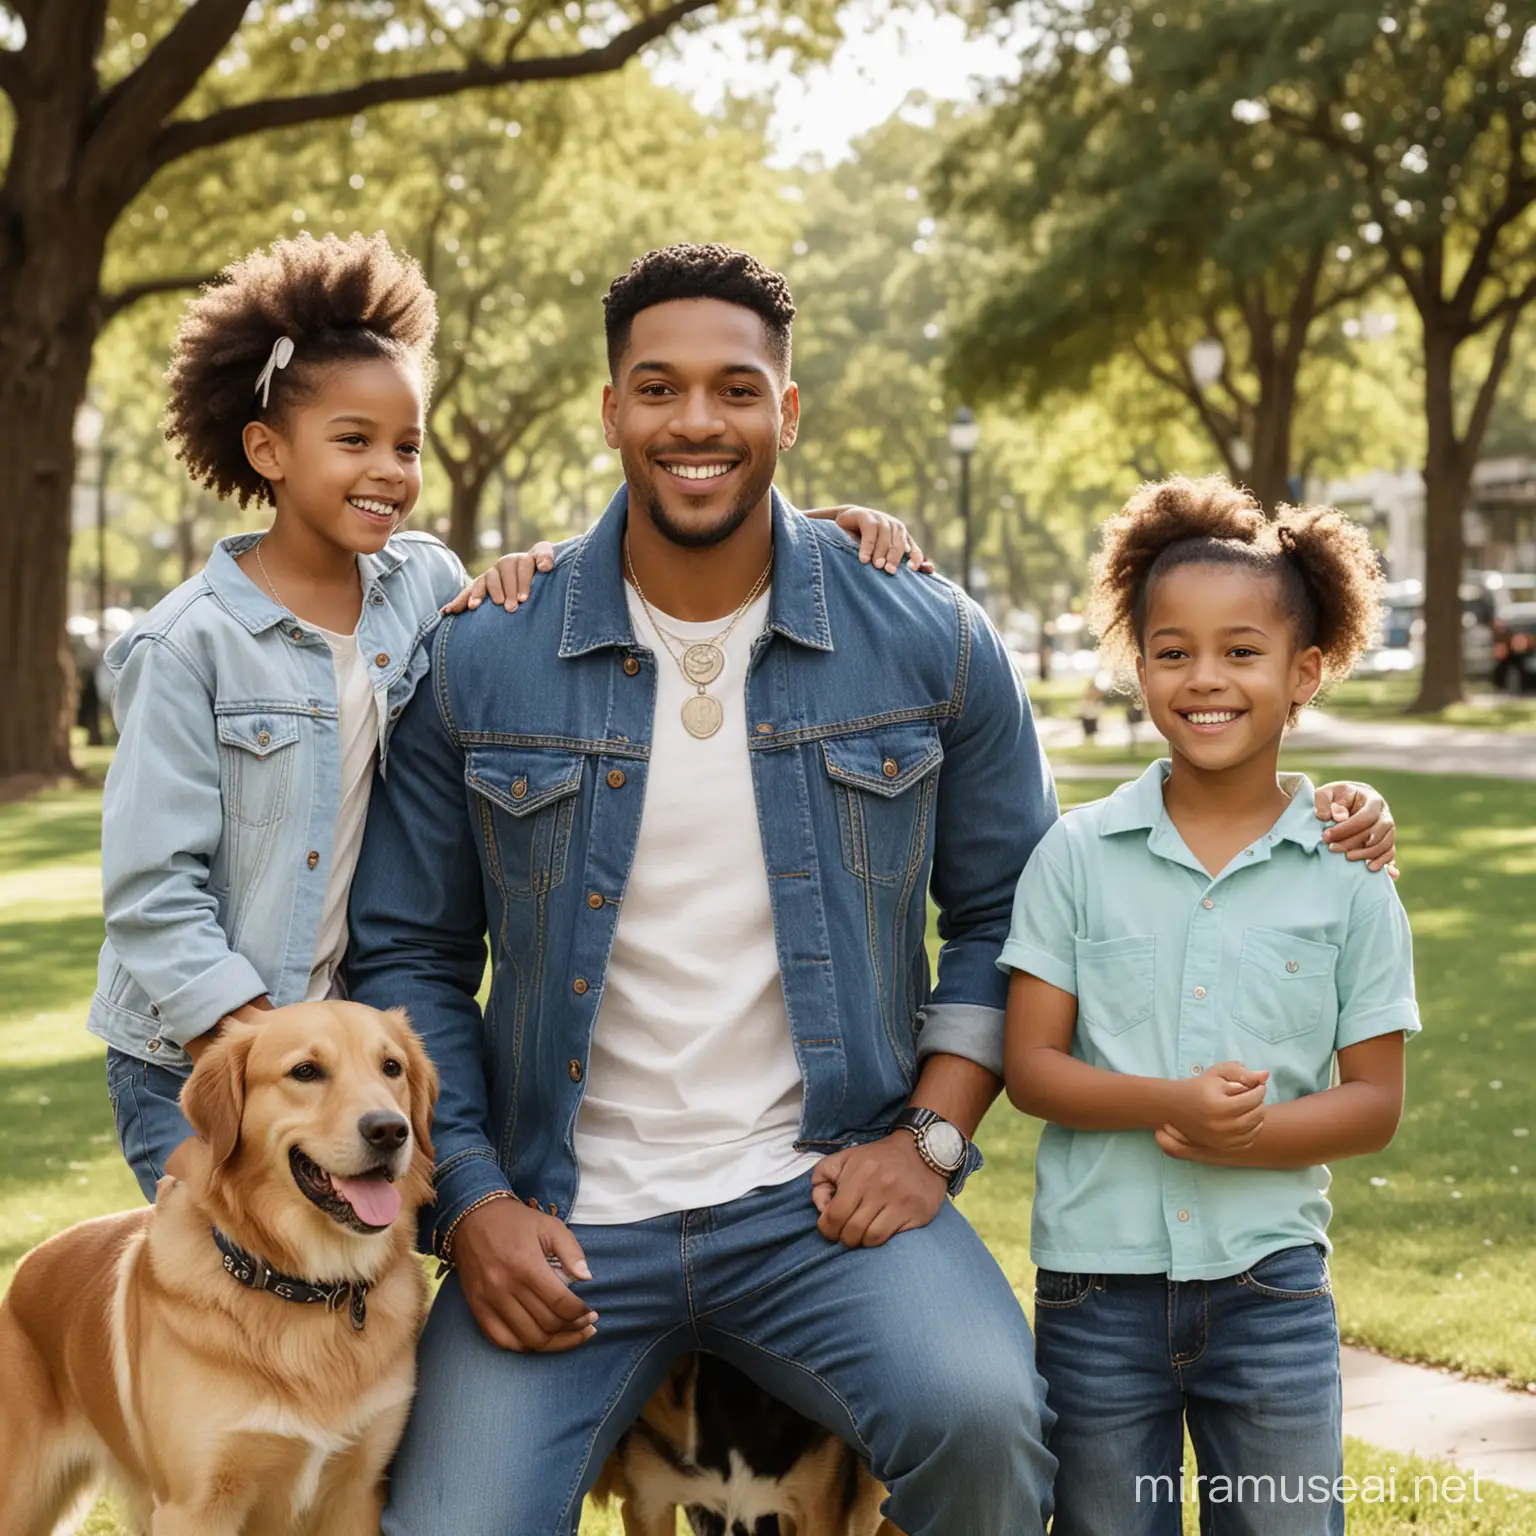 A man of color with his kids, playing in the park he dressed in a blue jean jacket and wearing a dog tag necklace. kids with regular tees